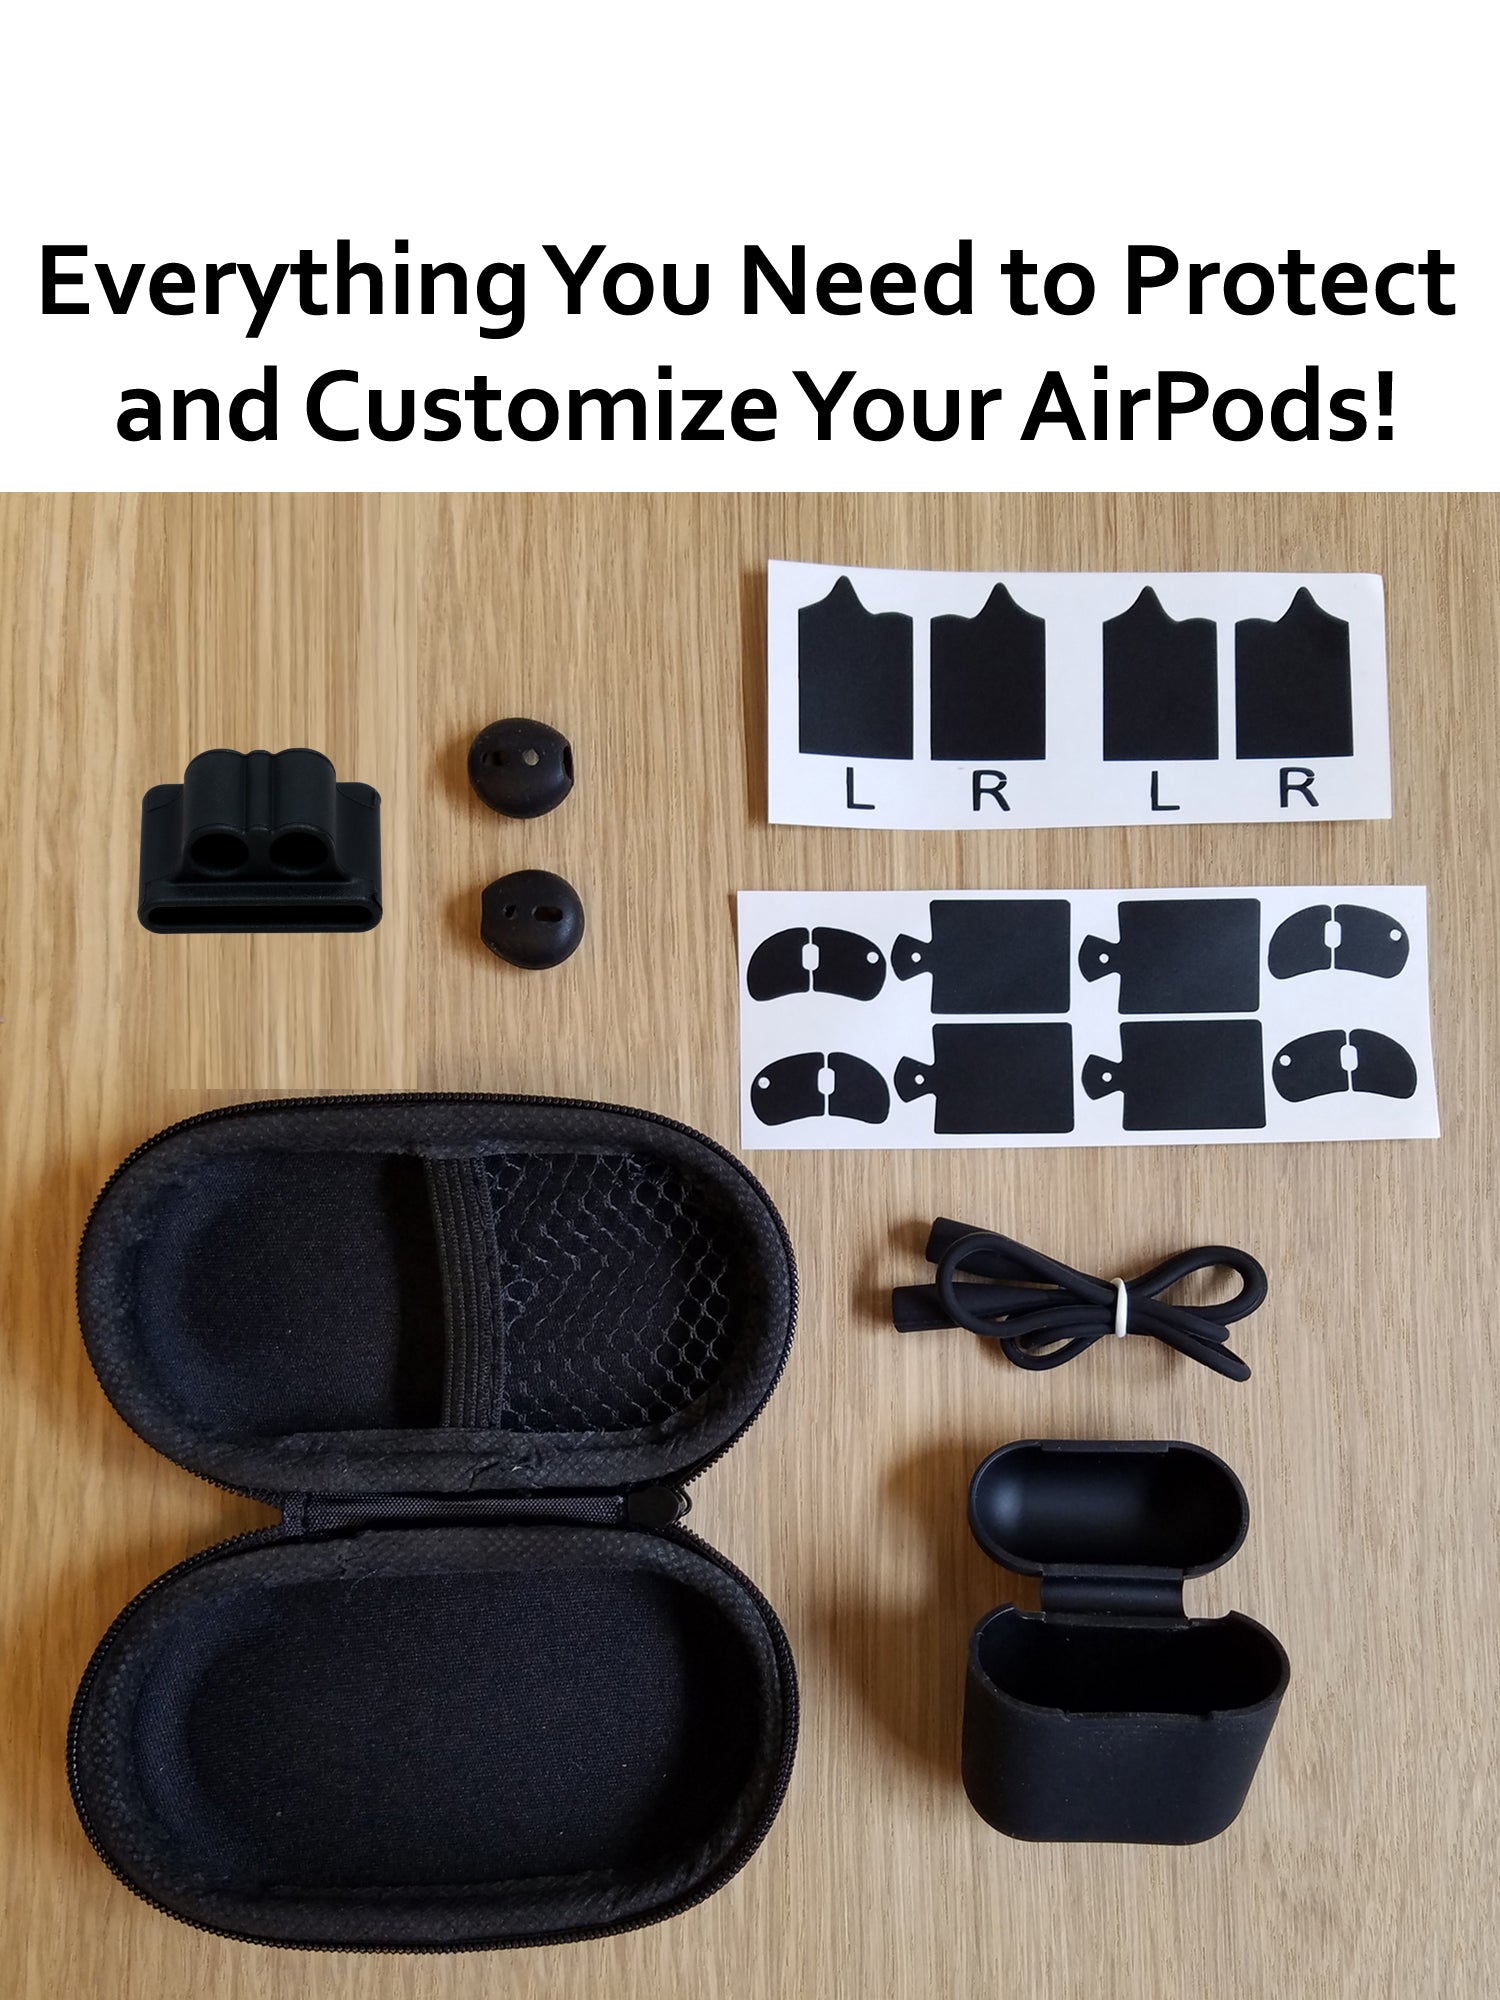 Ultimate Airpod Accessory Gift Pack - AirPod Skins, Case, Straps, Bander, Eartips and Hardshell Case